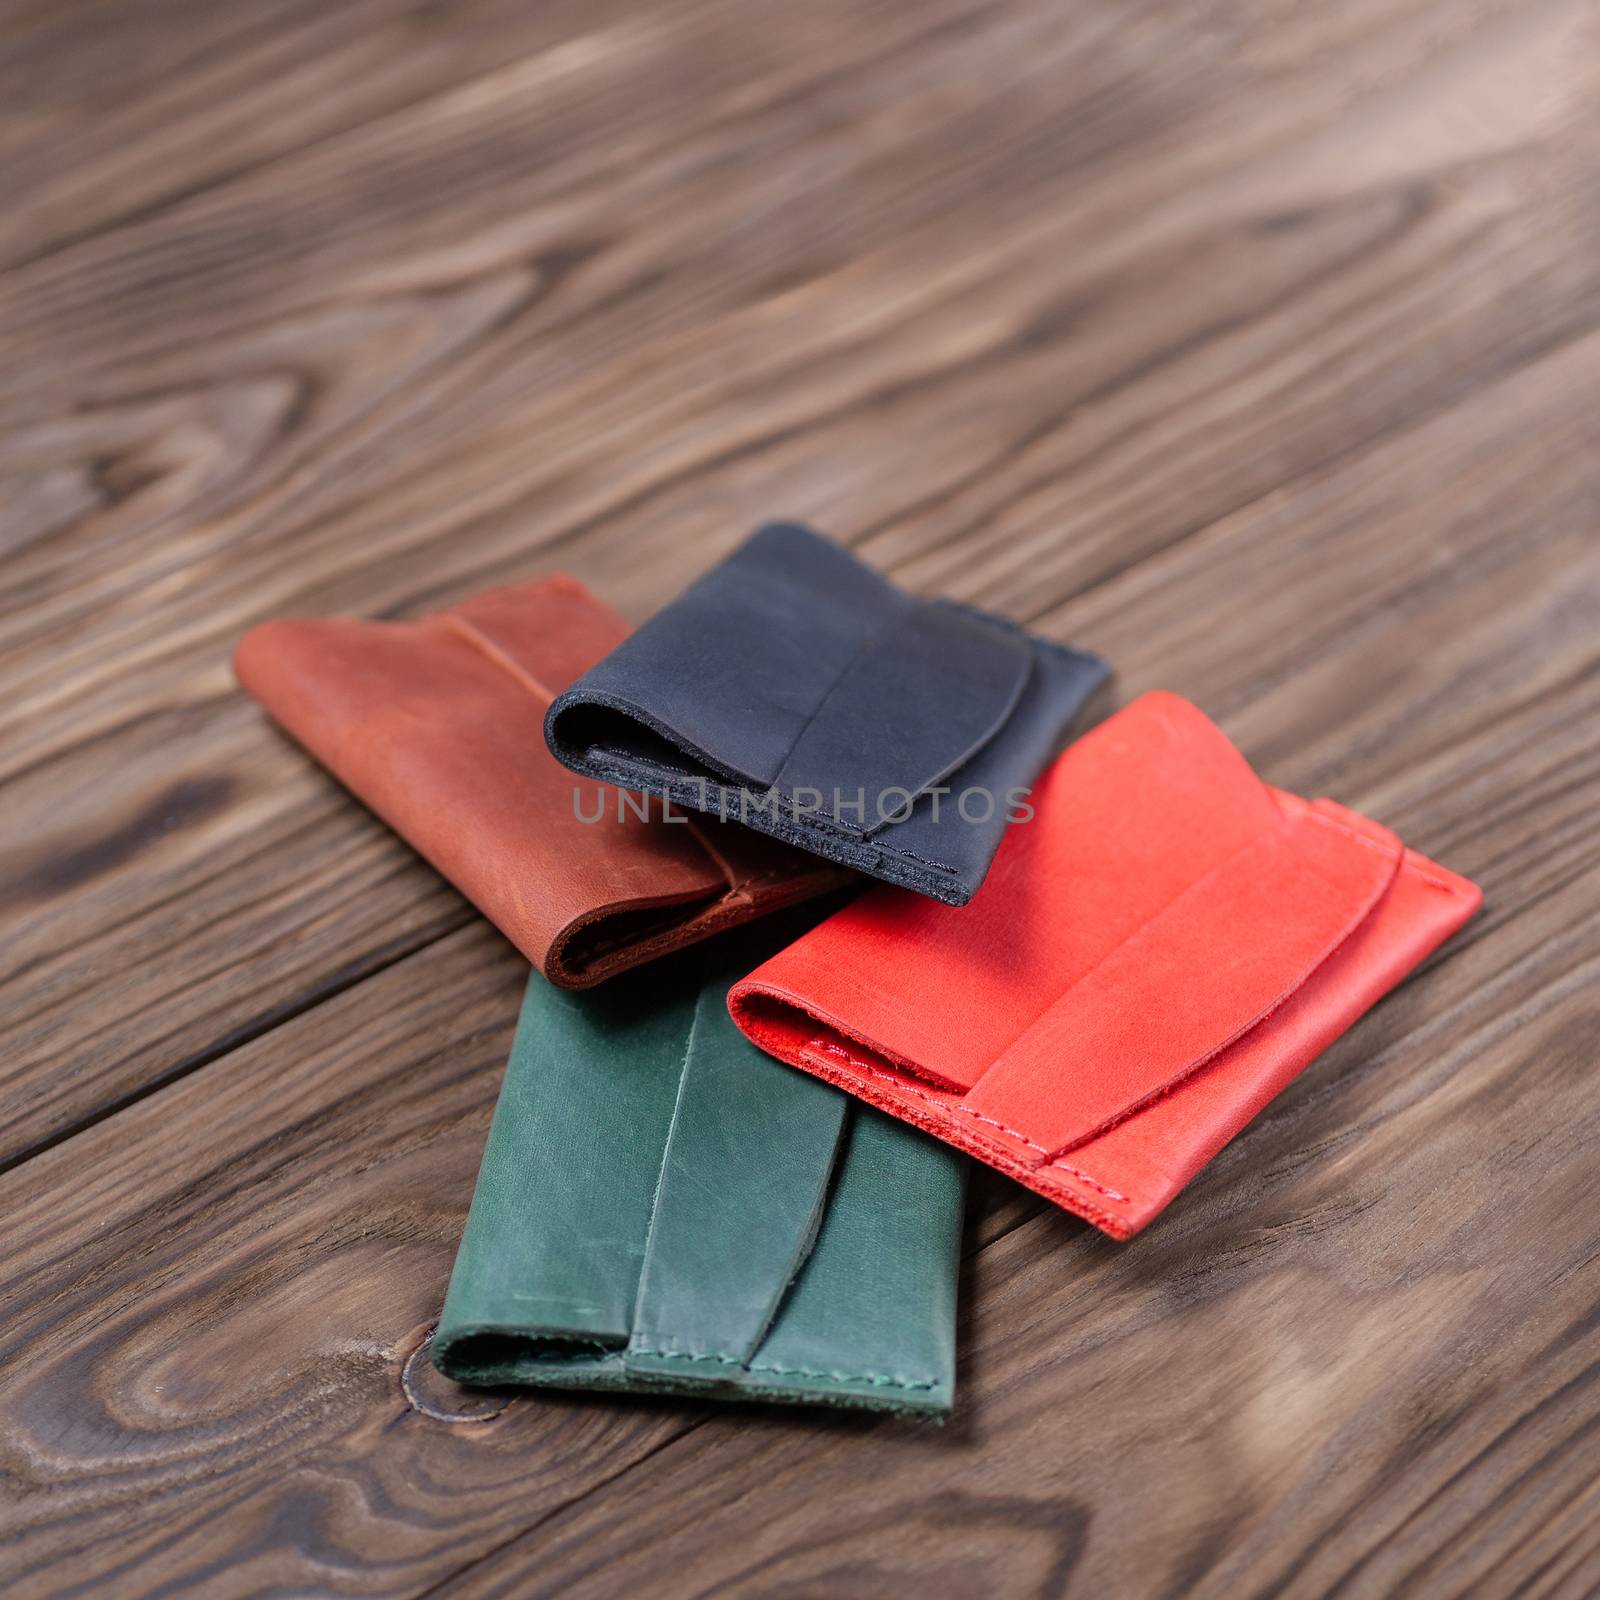 Flat lay photo of four different colour handmade leather one poc by alexsdriver